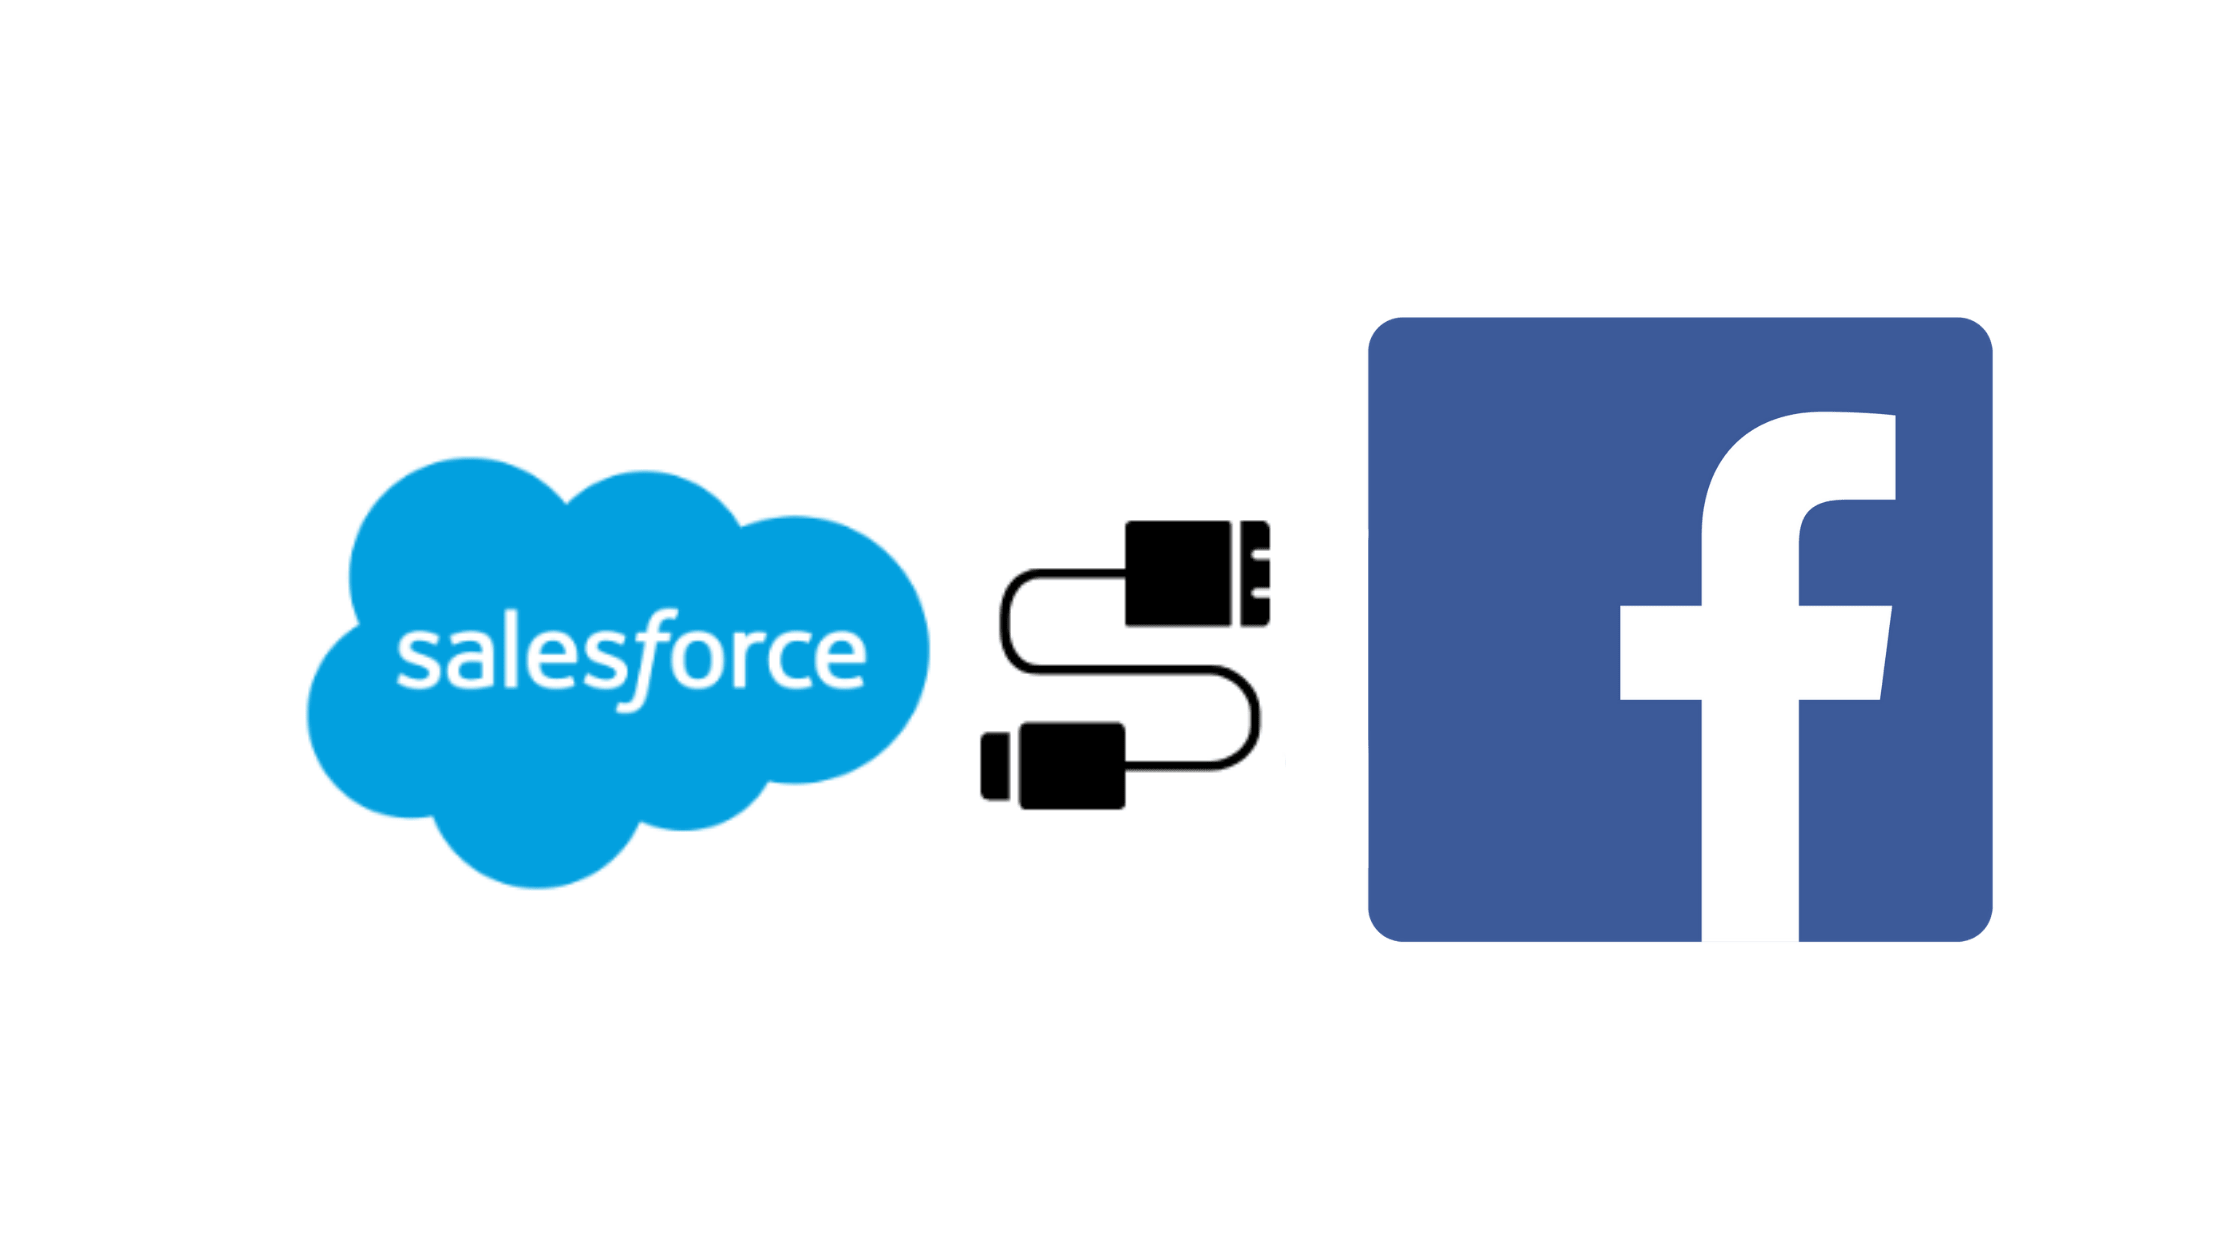 salesforce integration with facebook